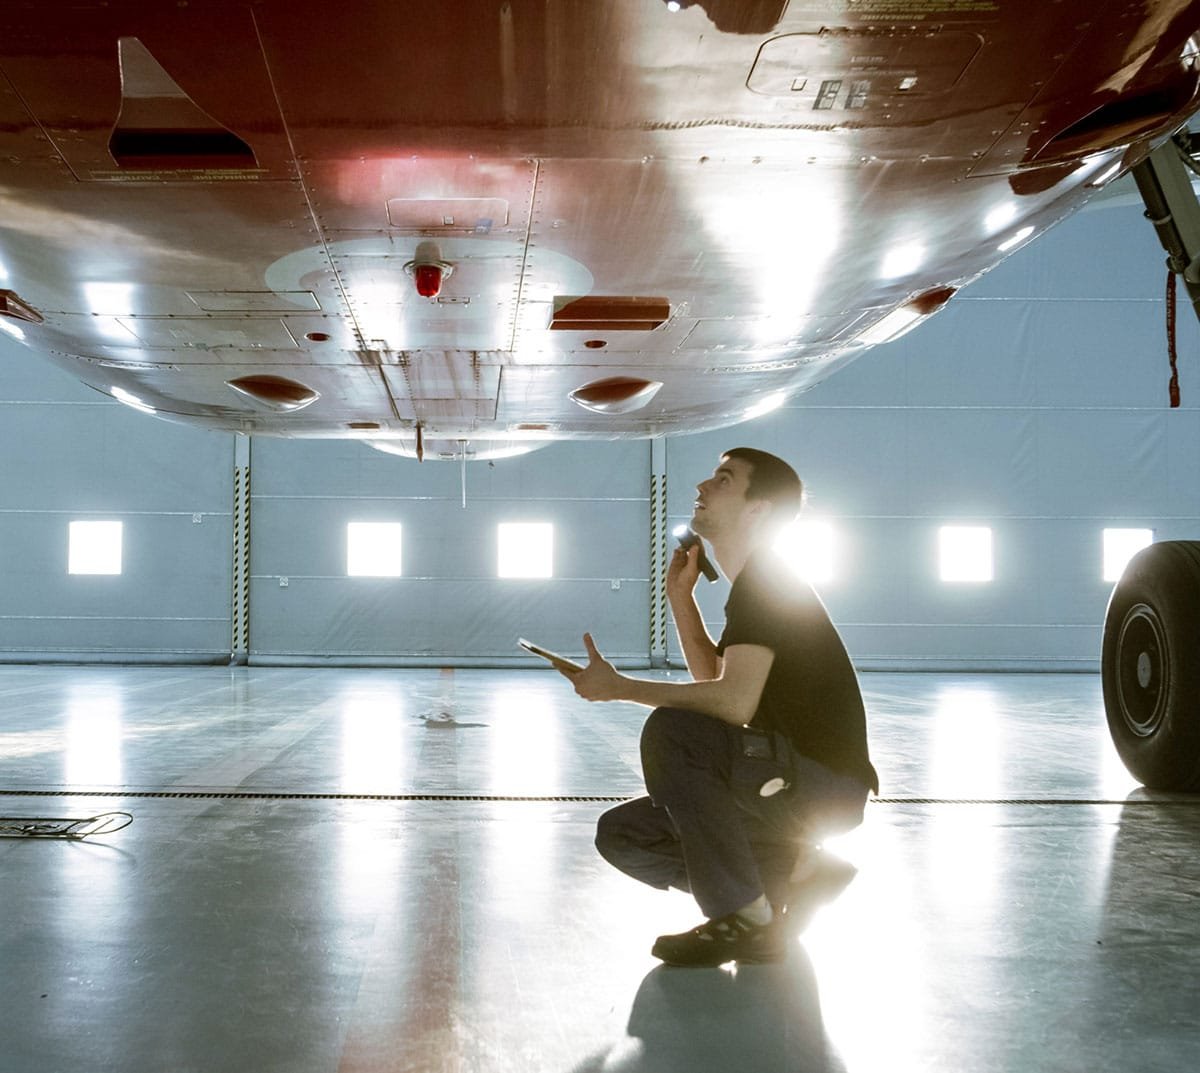 A man inspects the underside of a plane, in a hangar